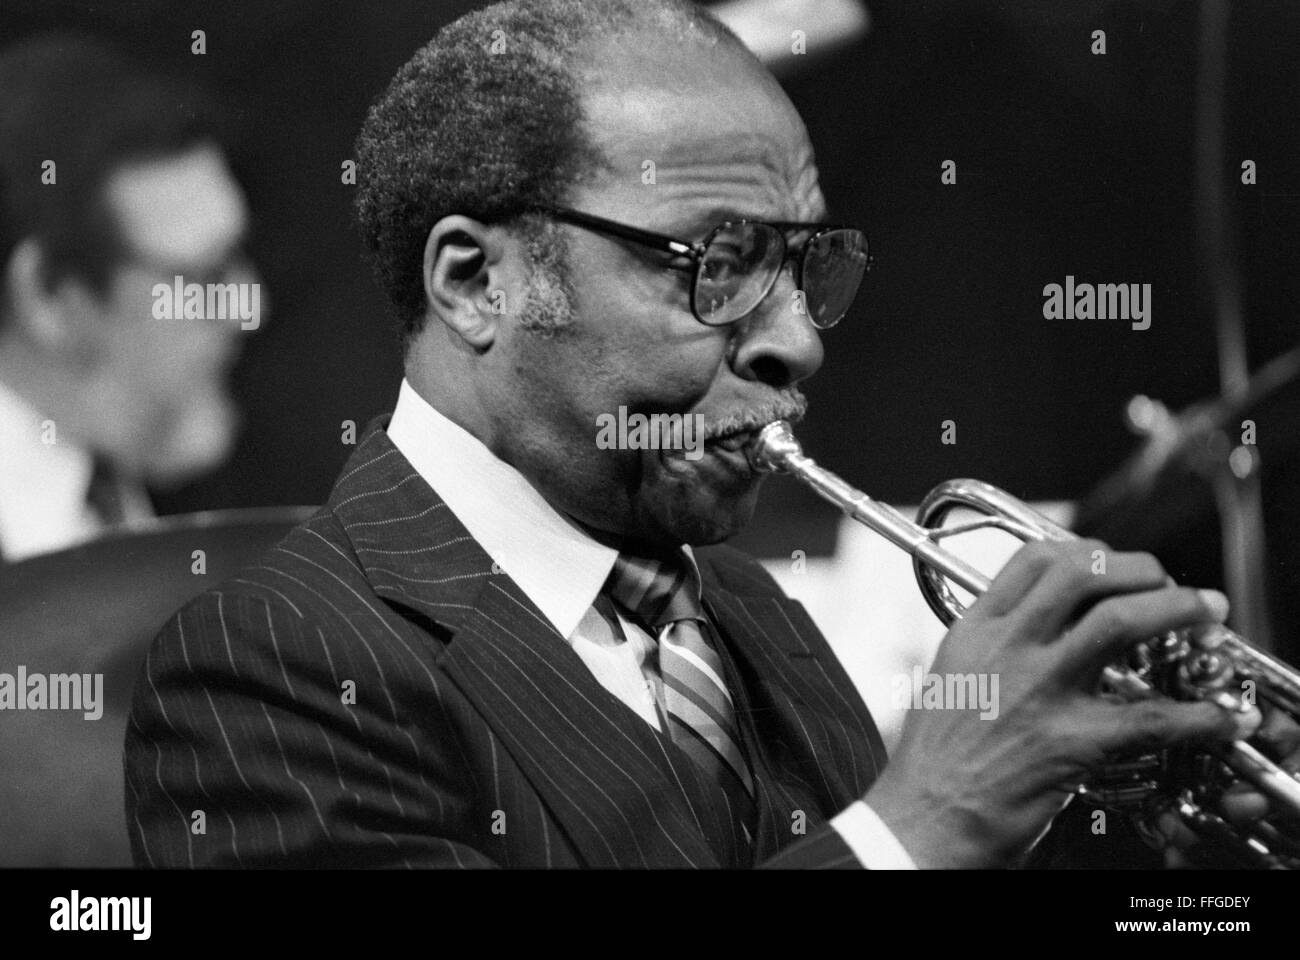 Joe Wilder, jazz musician, at a session arranged by Loren Schoenberg in New York City. The concert was January 20, 1985, at the Vineyard Theater in Manhattan. Stock Photo